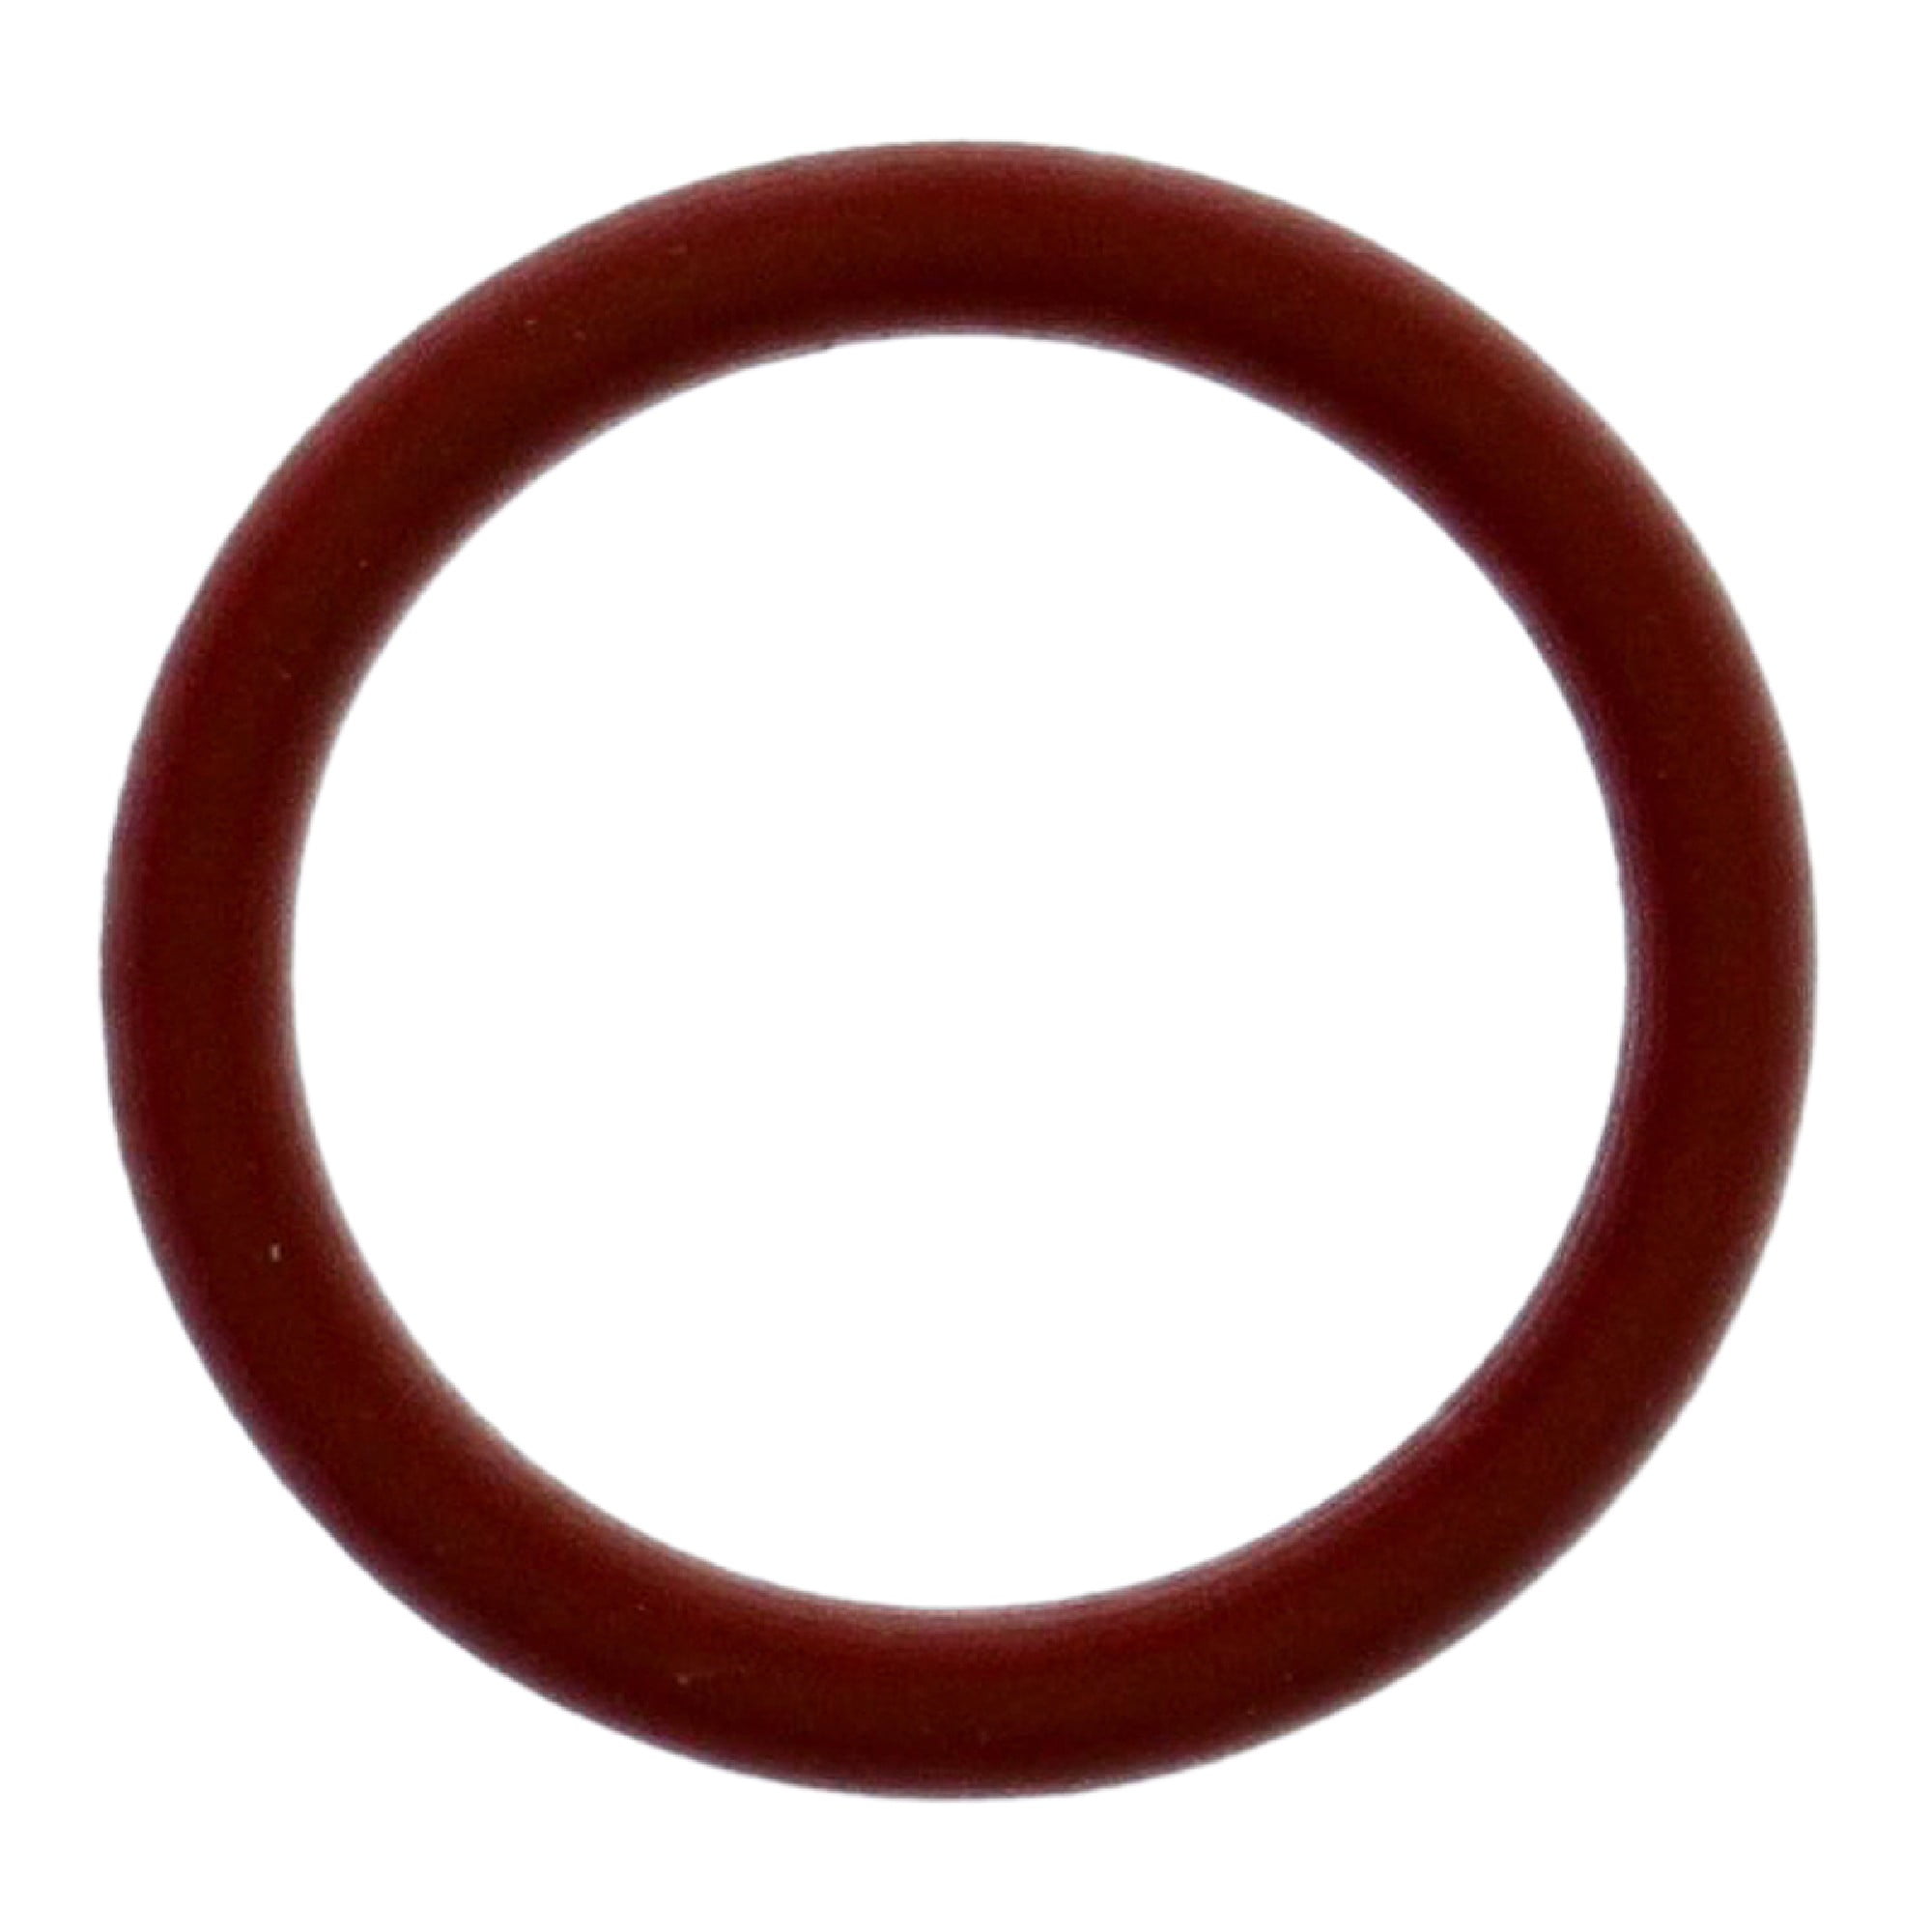 New Vertex Exhaust Gasket Kit (823194) Compatible with/Replacement for Suzuki  LT-160 2003-2004, LT-F160 1991-2001